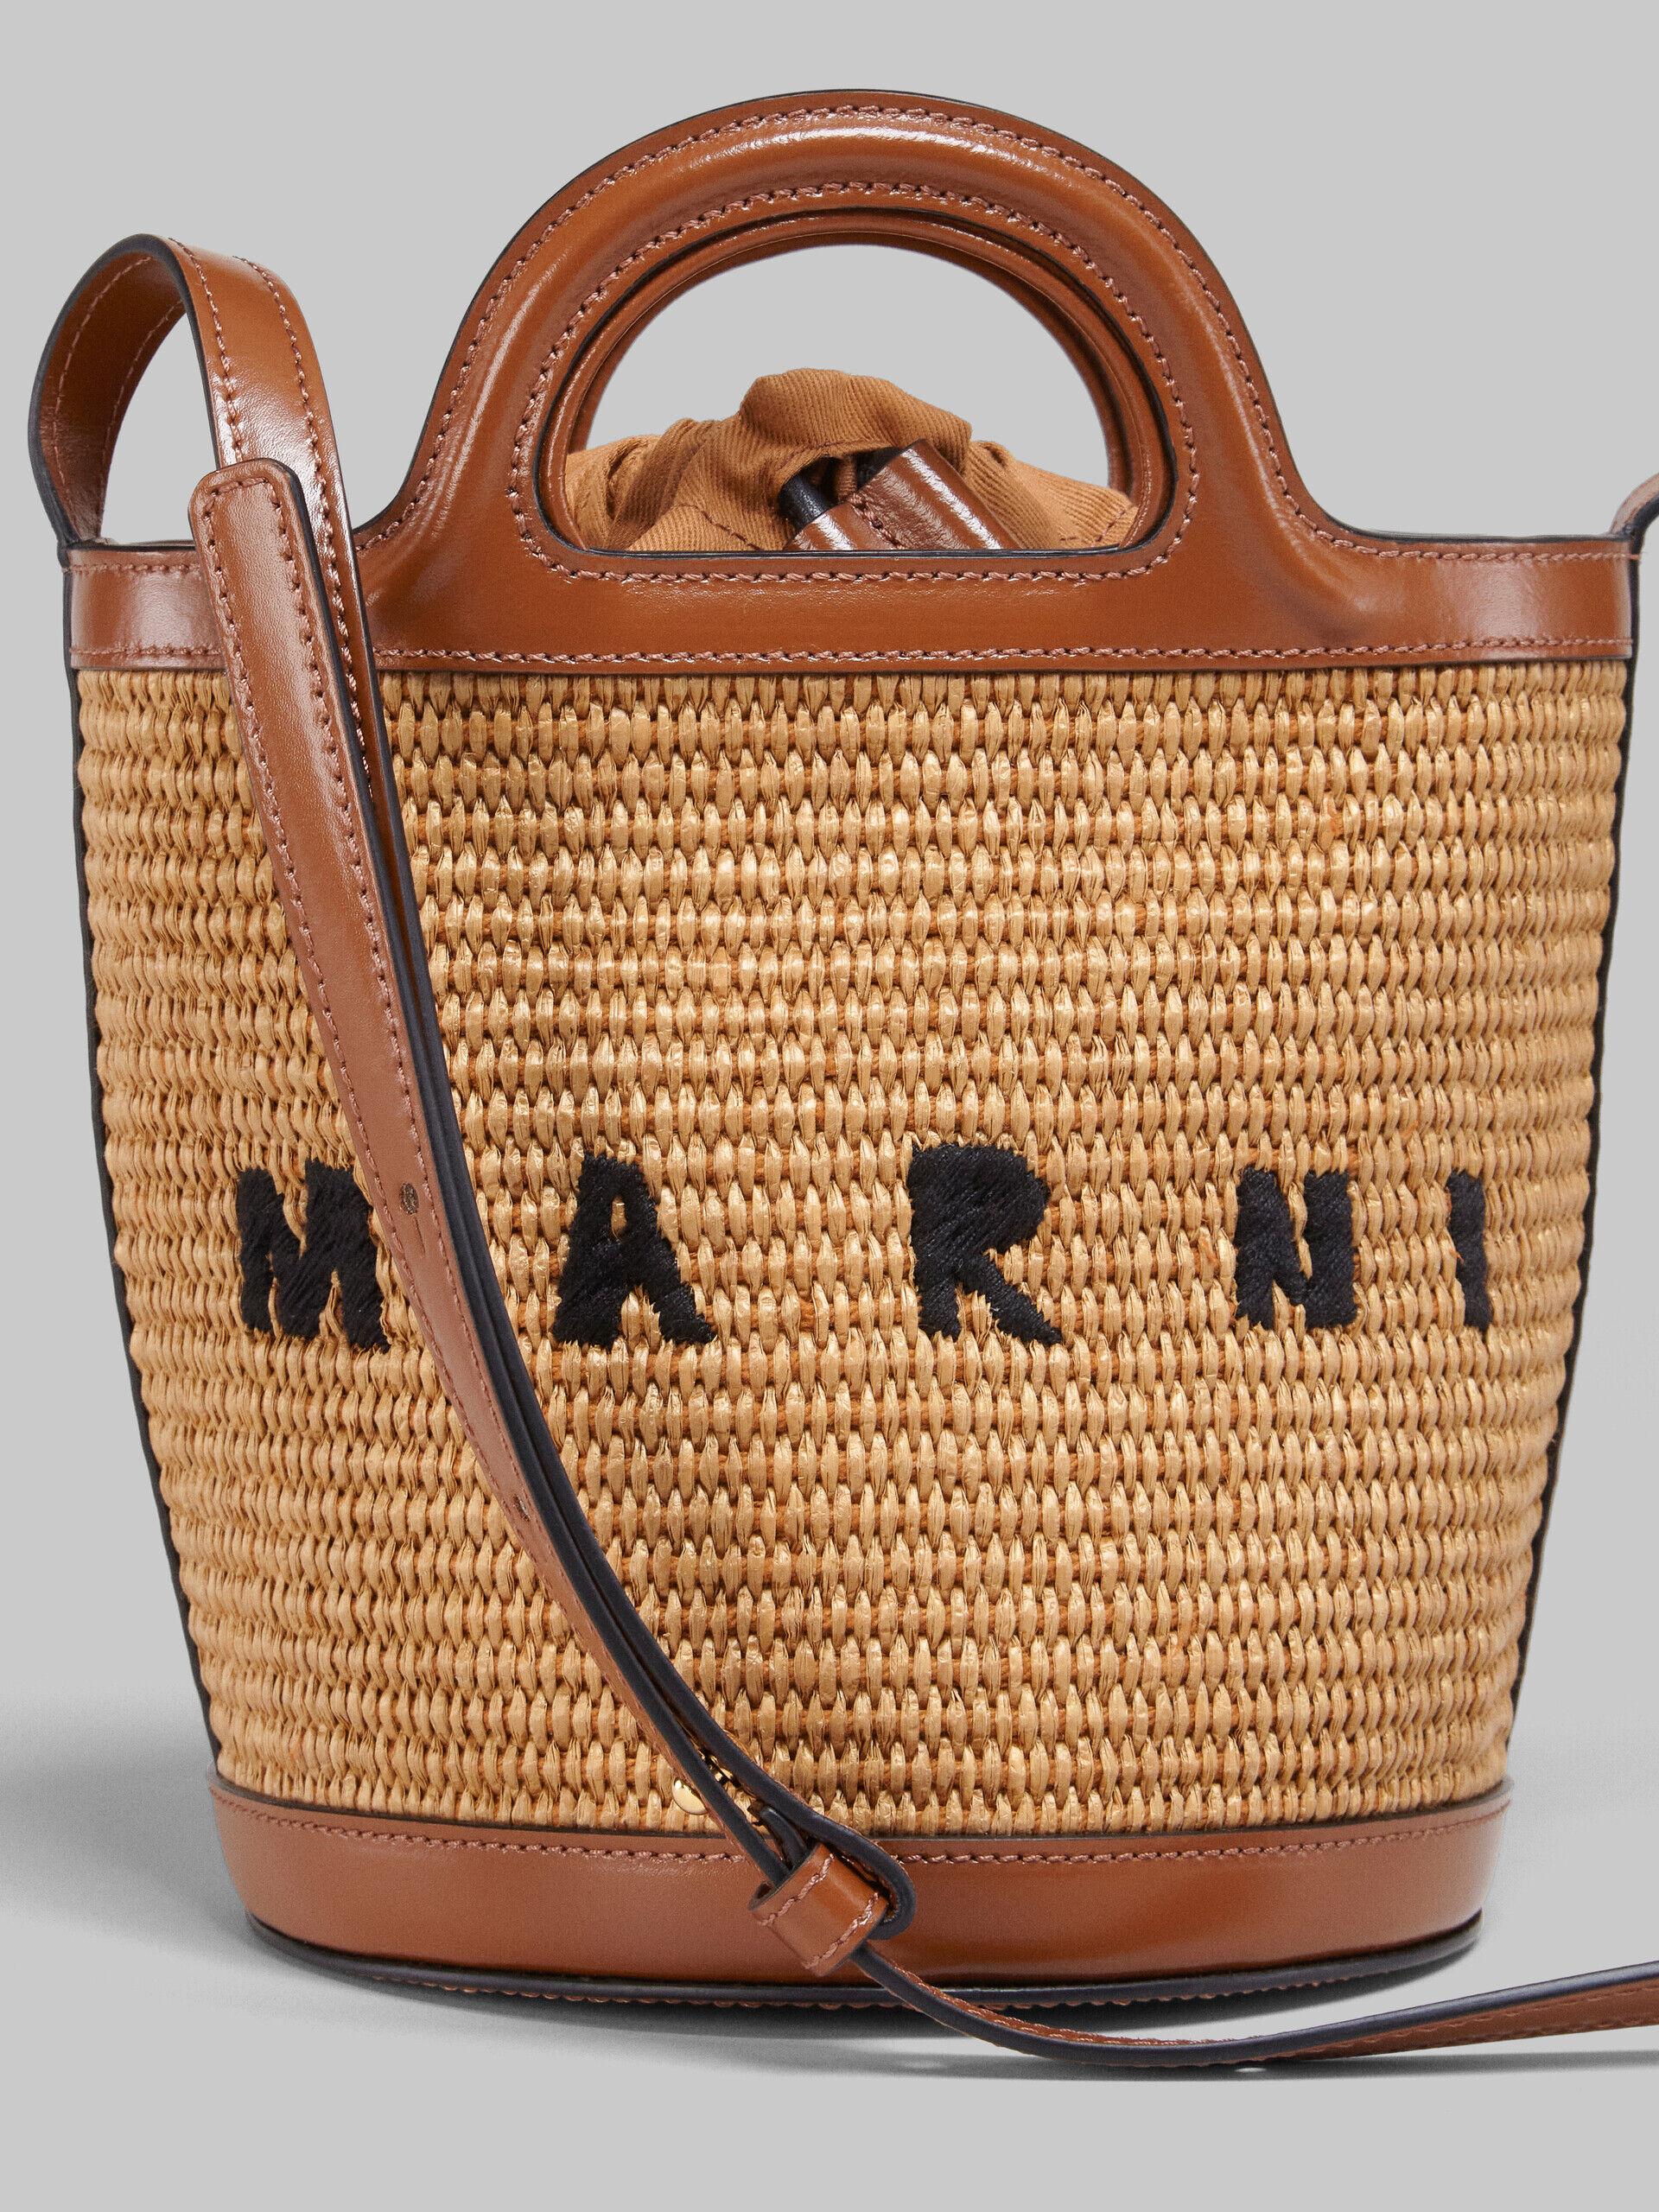 Tropicalia Small Bucket Bag in brown leather and raffia-effect